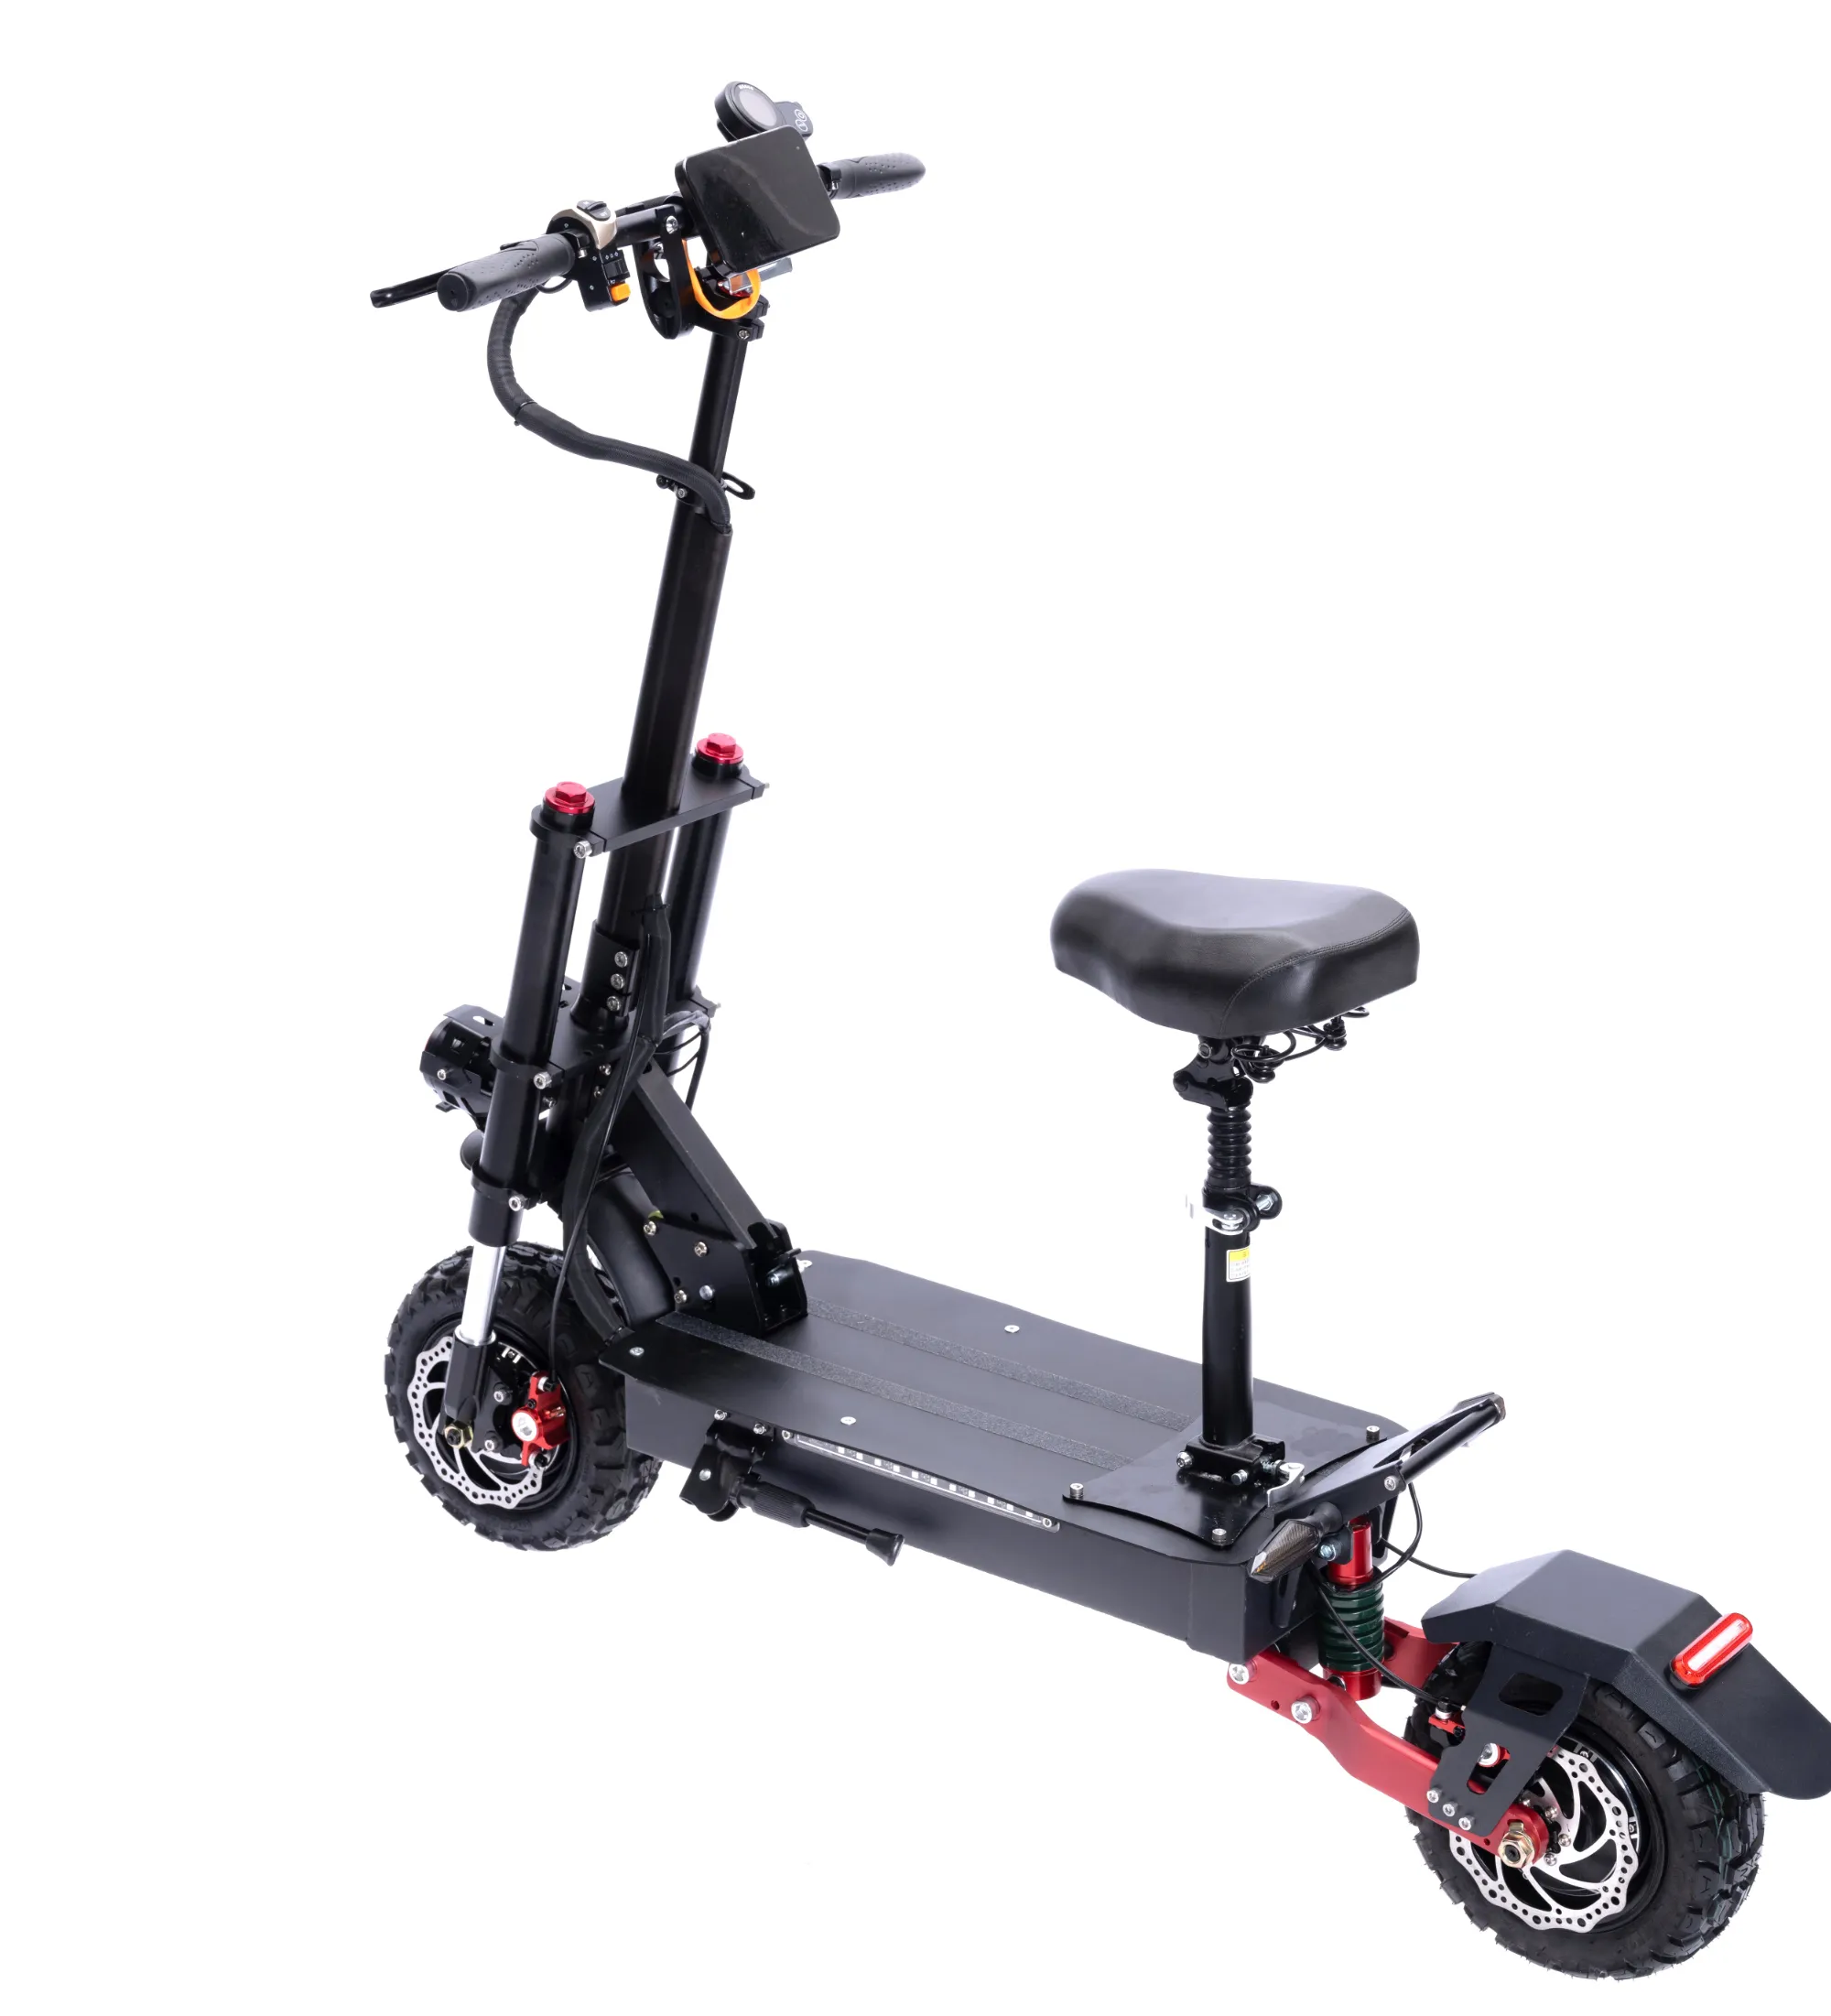 Us Uk Eu Warehouse Electric Motorcycle Scooter Folding E-scooter 11inch Tire Electric Mobility Scooter